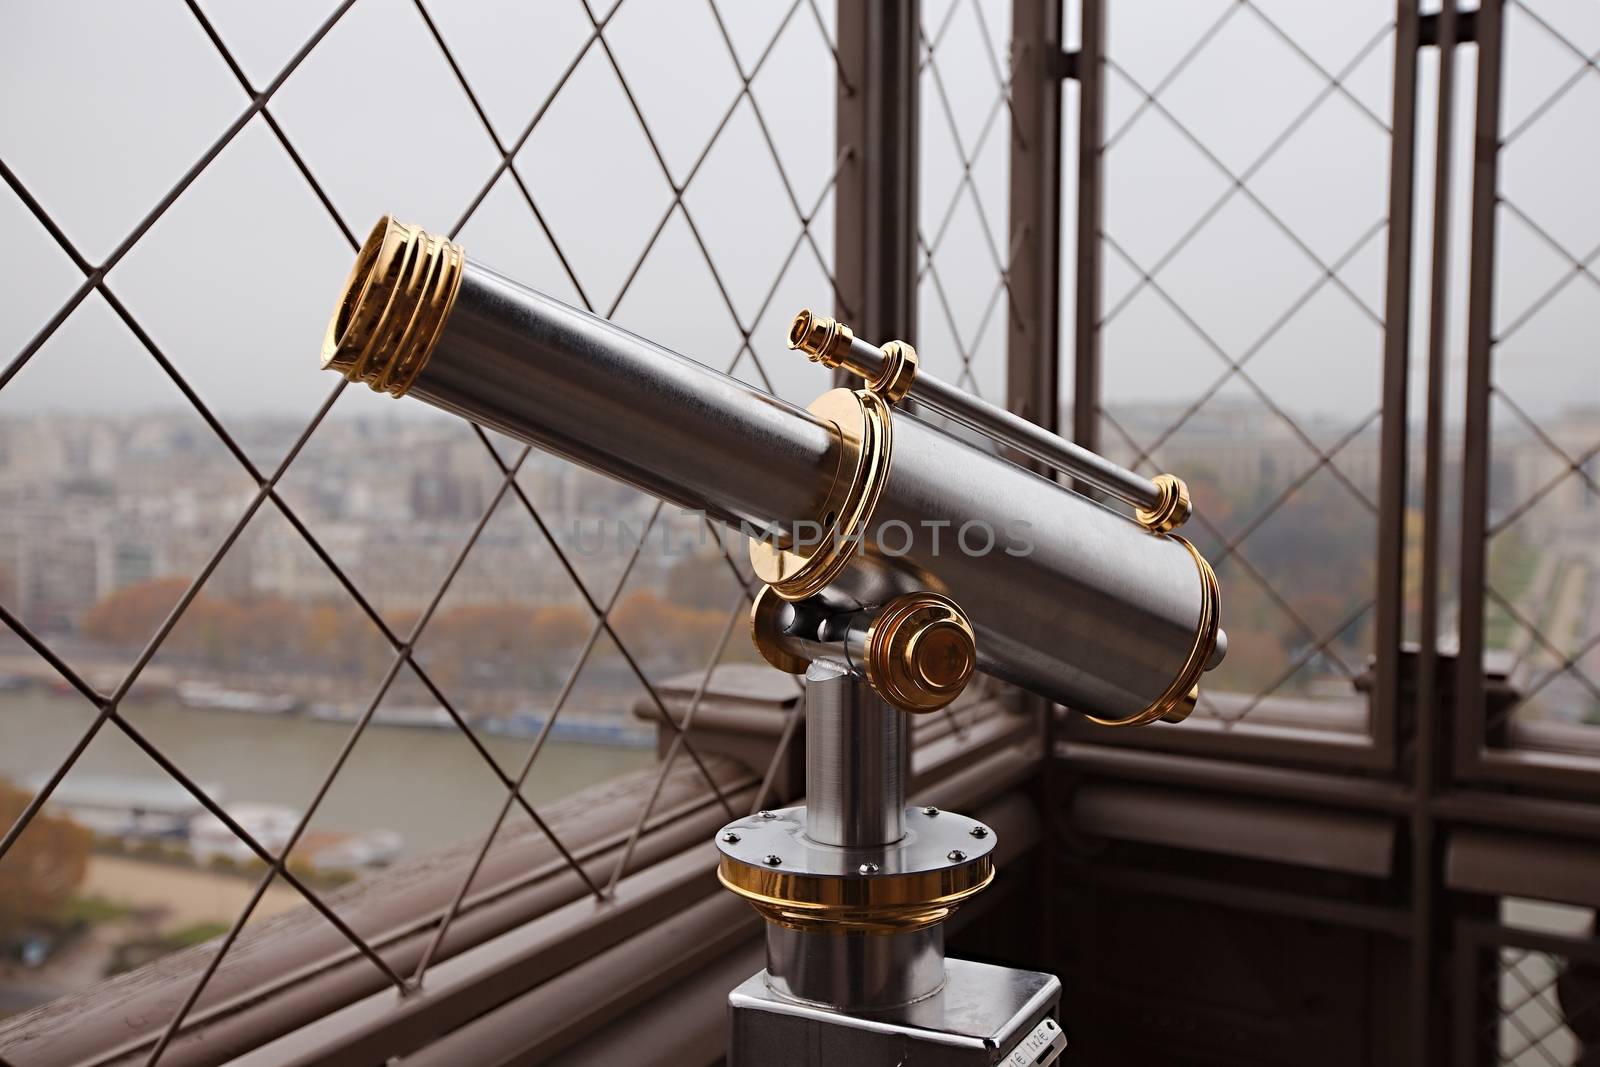 Eiffel Tower telescope on the observation deck